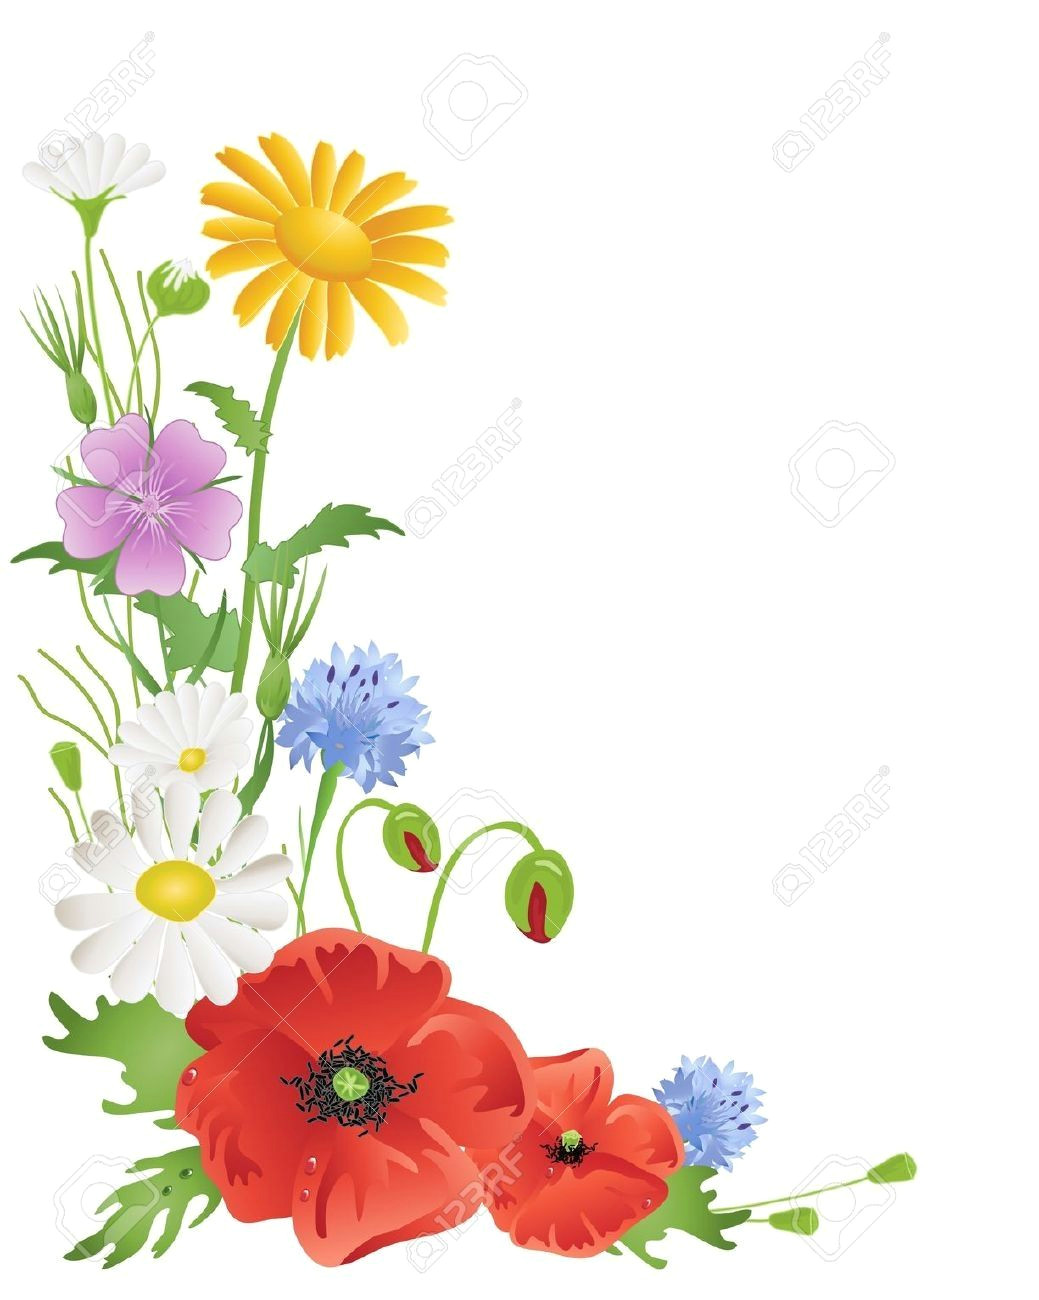 drawings of a bunch of wild flowers wildflowers borders clipart clipartsgram com